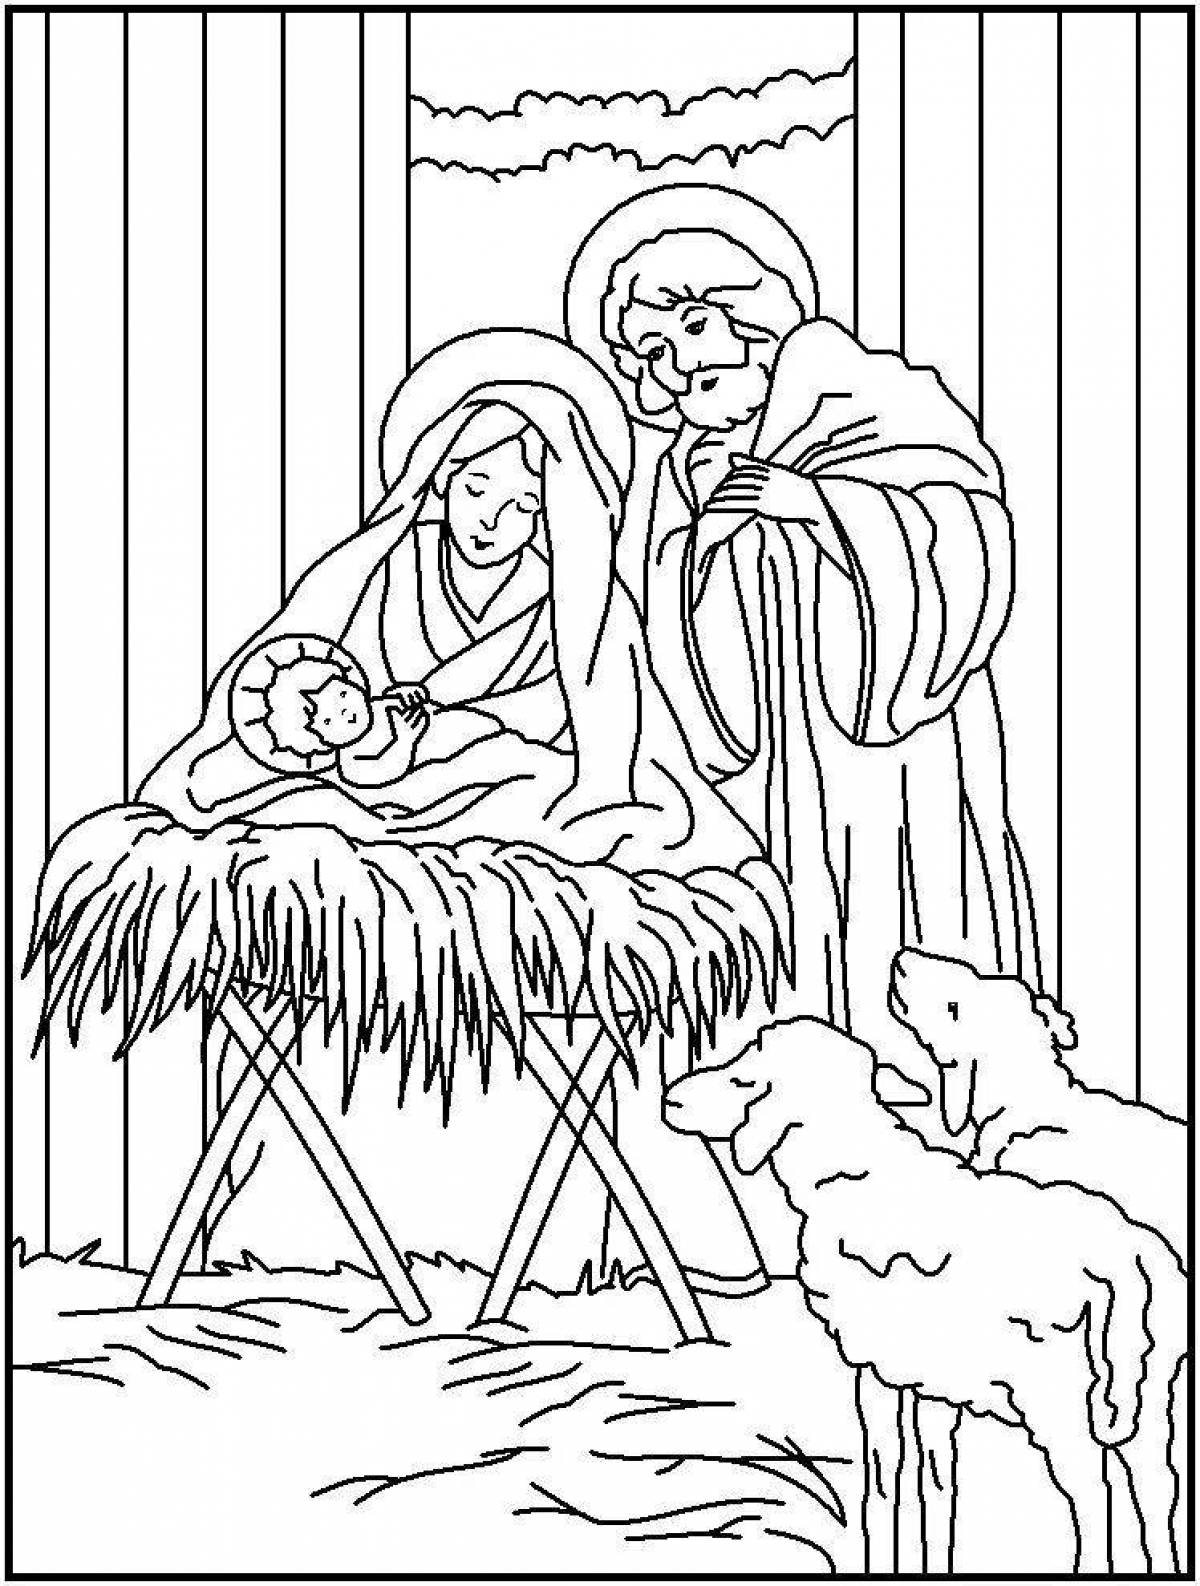 Dazzling merry christmas coloring book